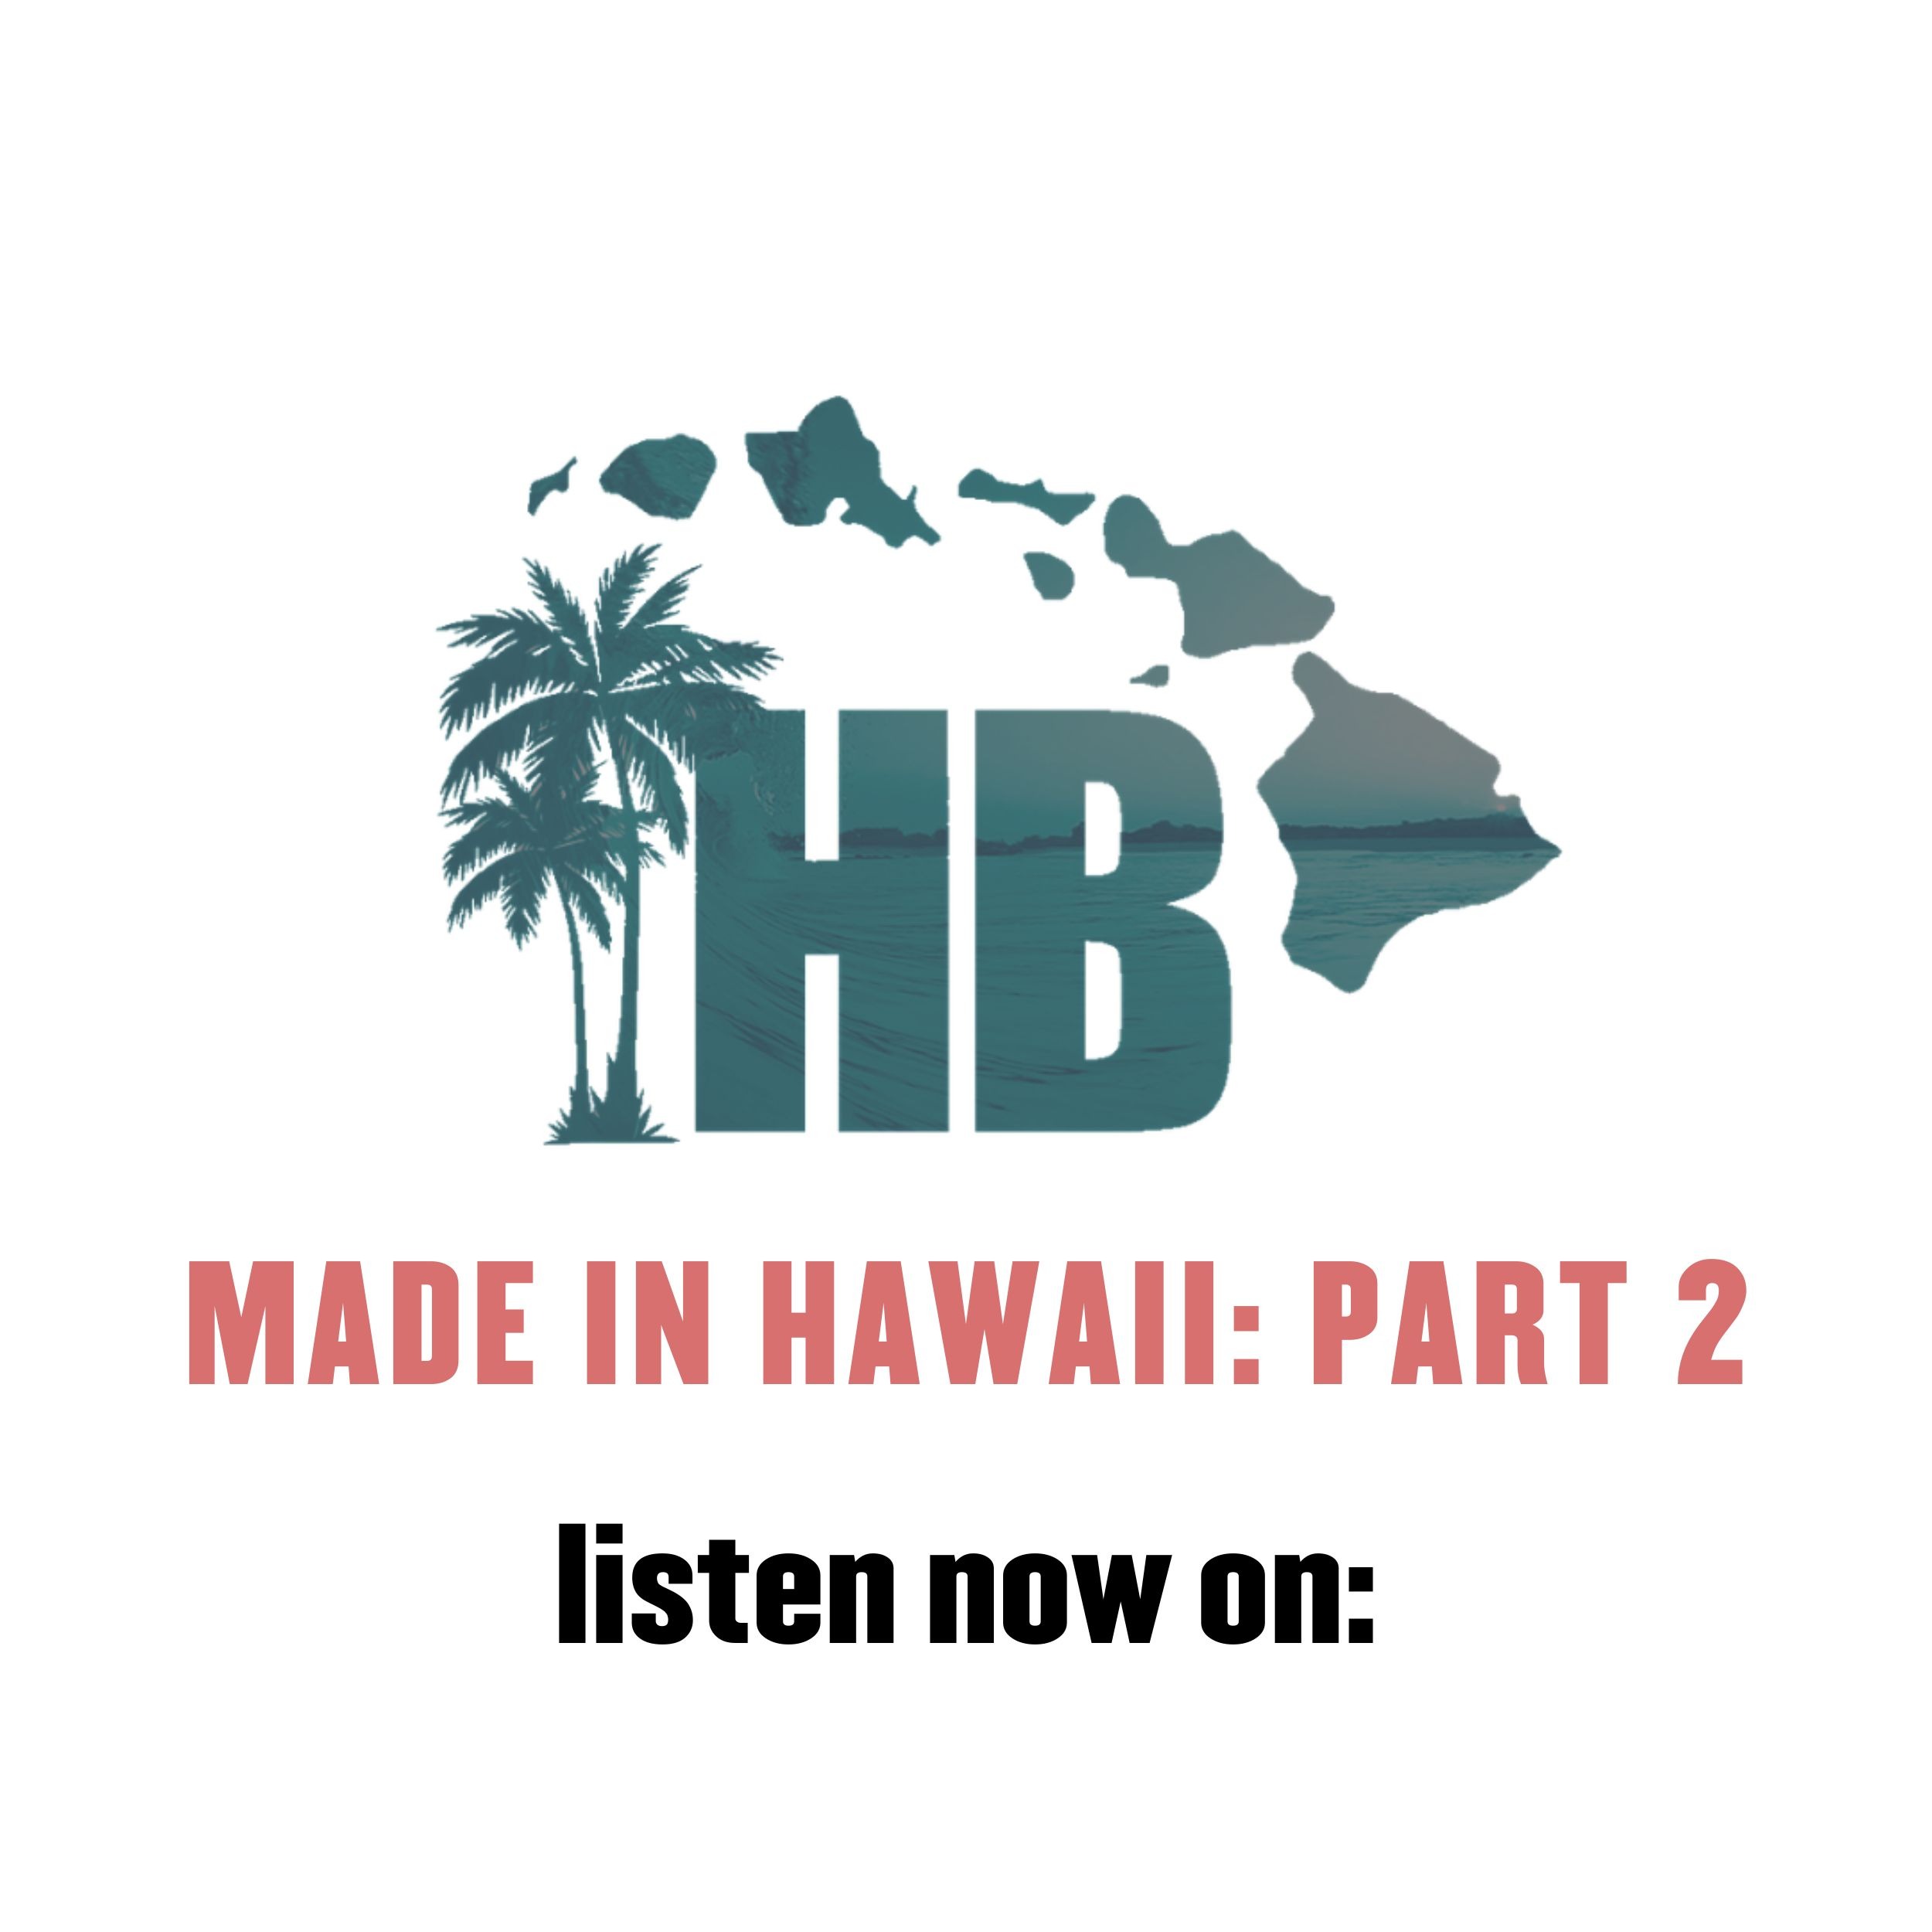 made in hawaii podcast part 2